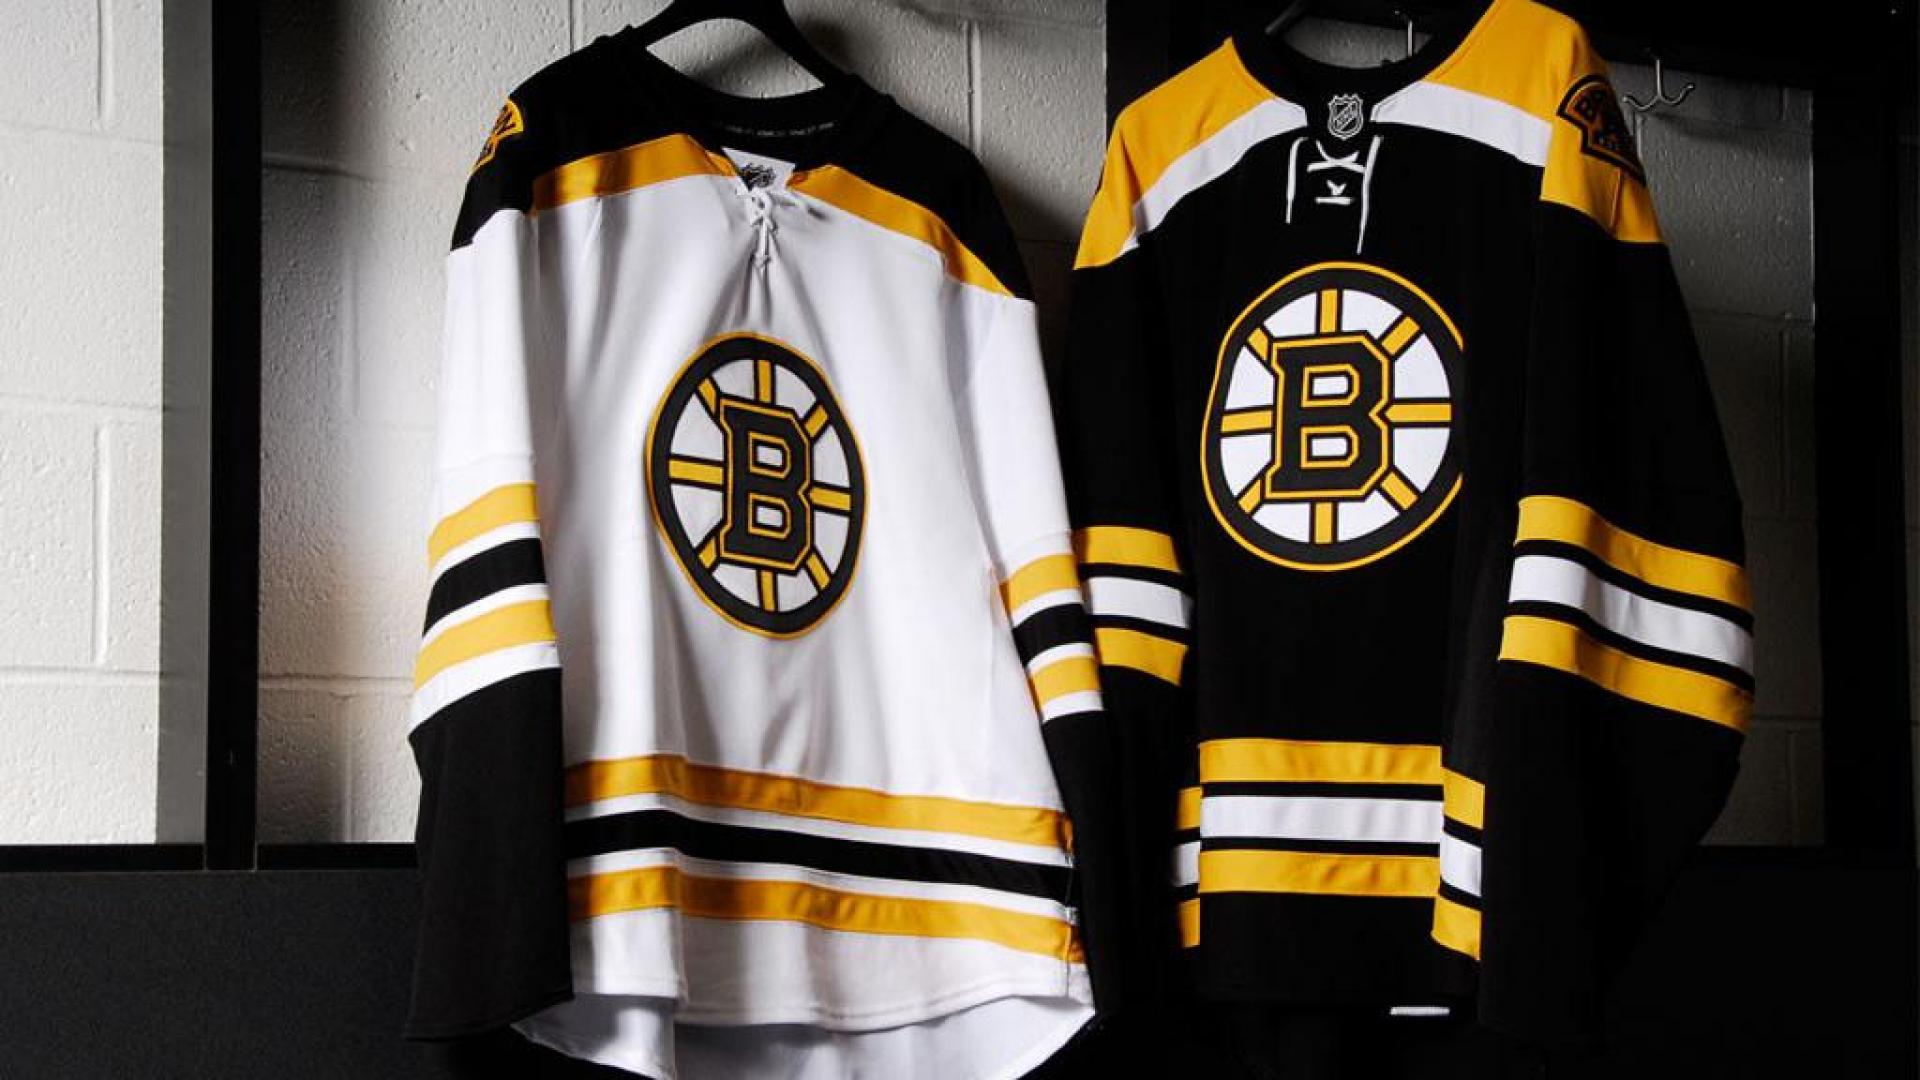 Boston bruins jerseys wallpaper - (#114165) - High Quality and ...